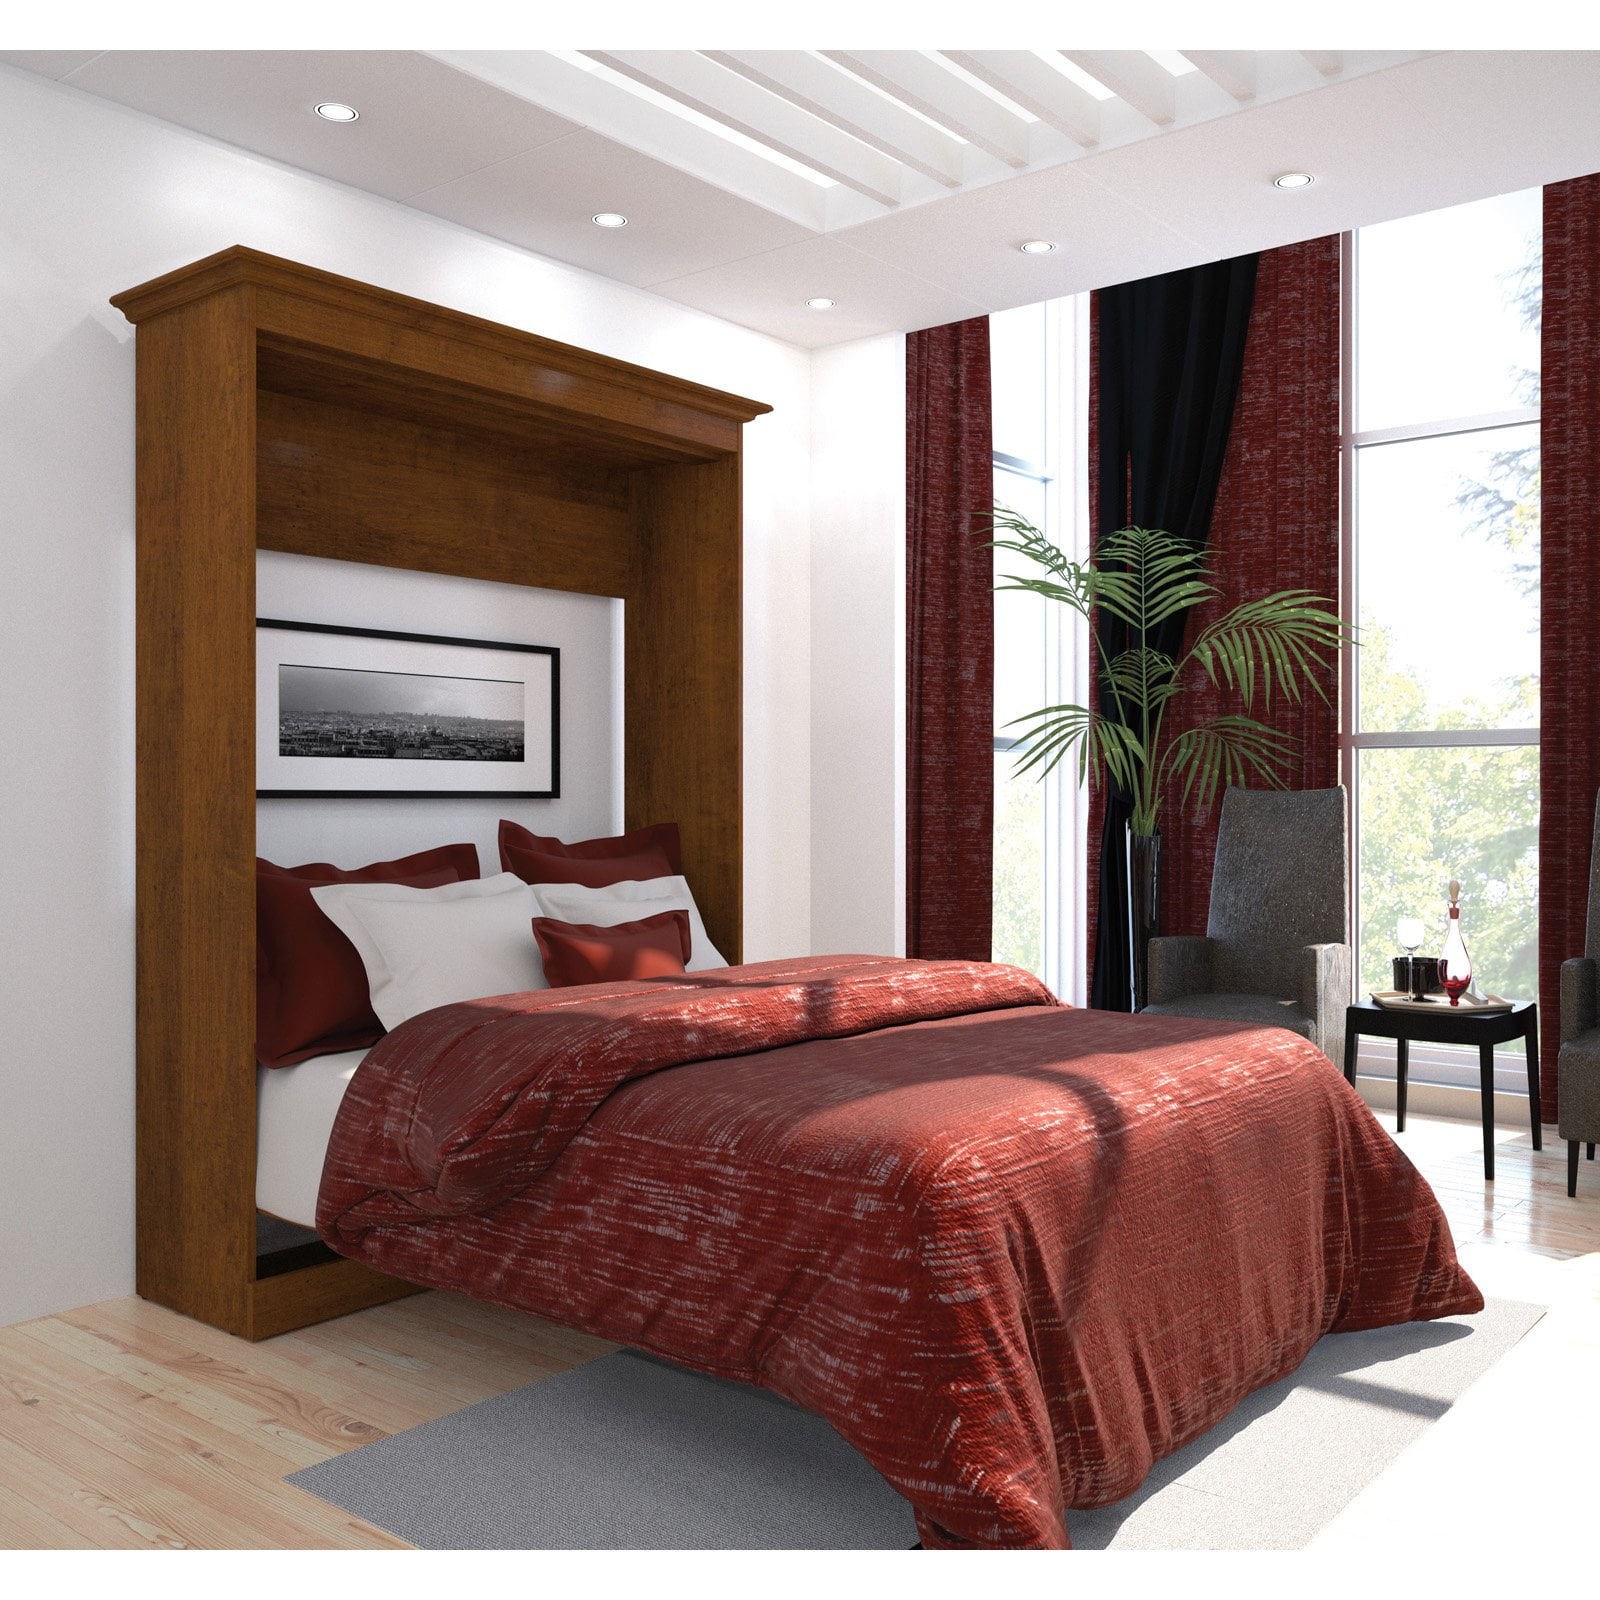 Versatile by Bestar 64'' Full Wall Bed in Tuscany Brown ...